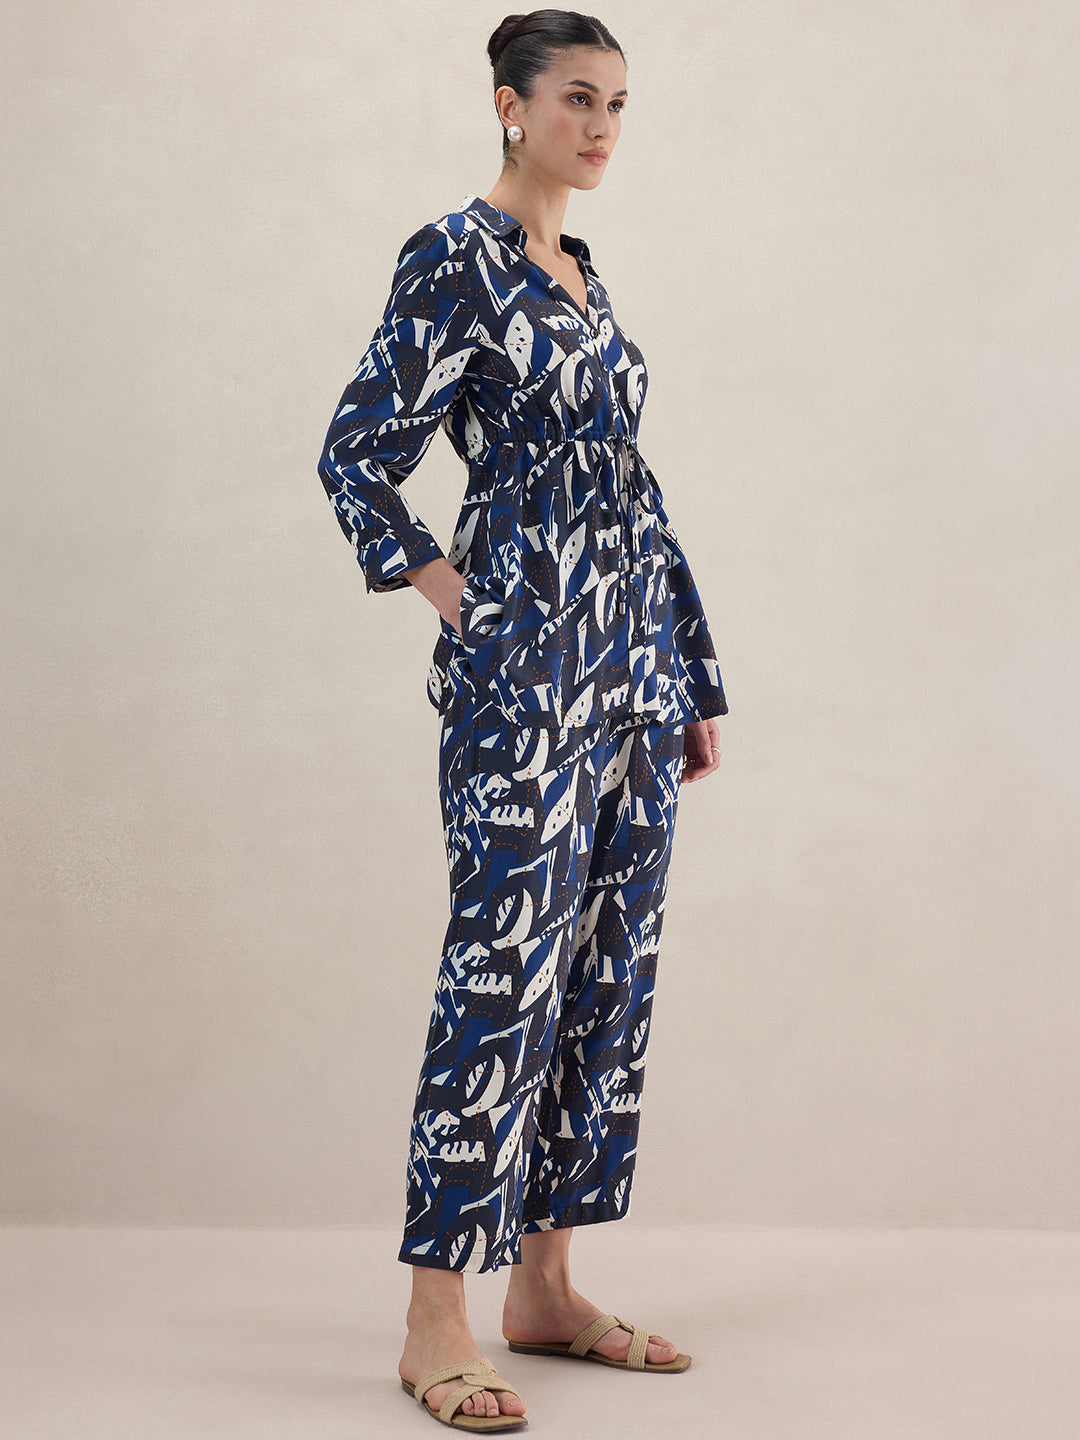 Blue Abstract Printed Button Down Drawstring Co-Ord Set